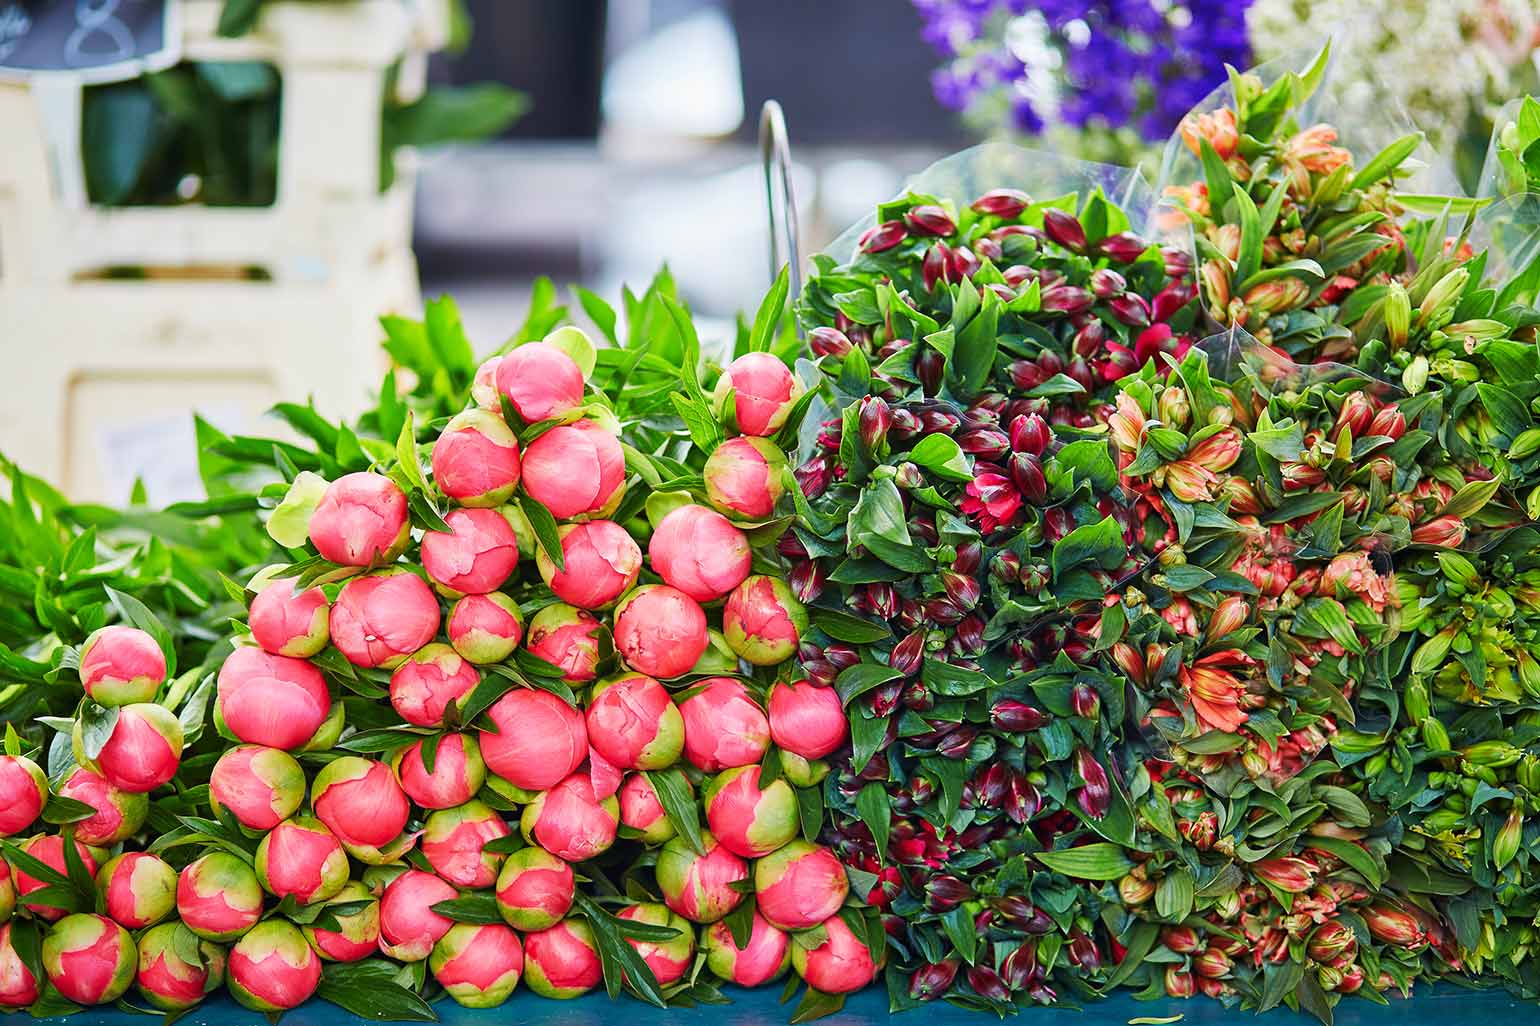 Bunches of fresh peony on flower market in Paris, France